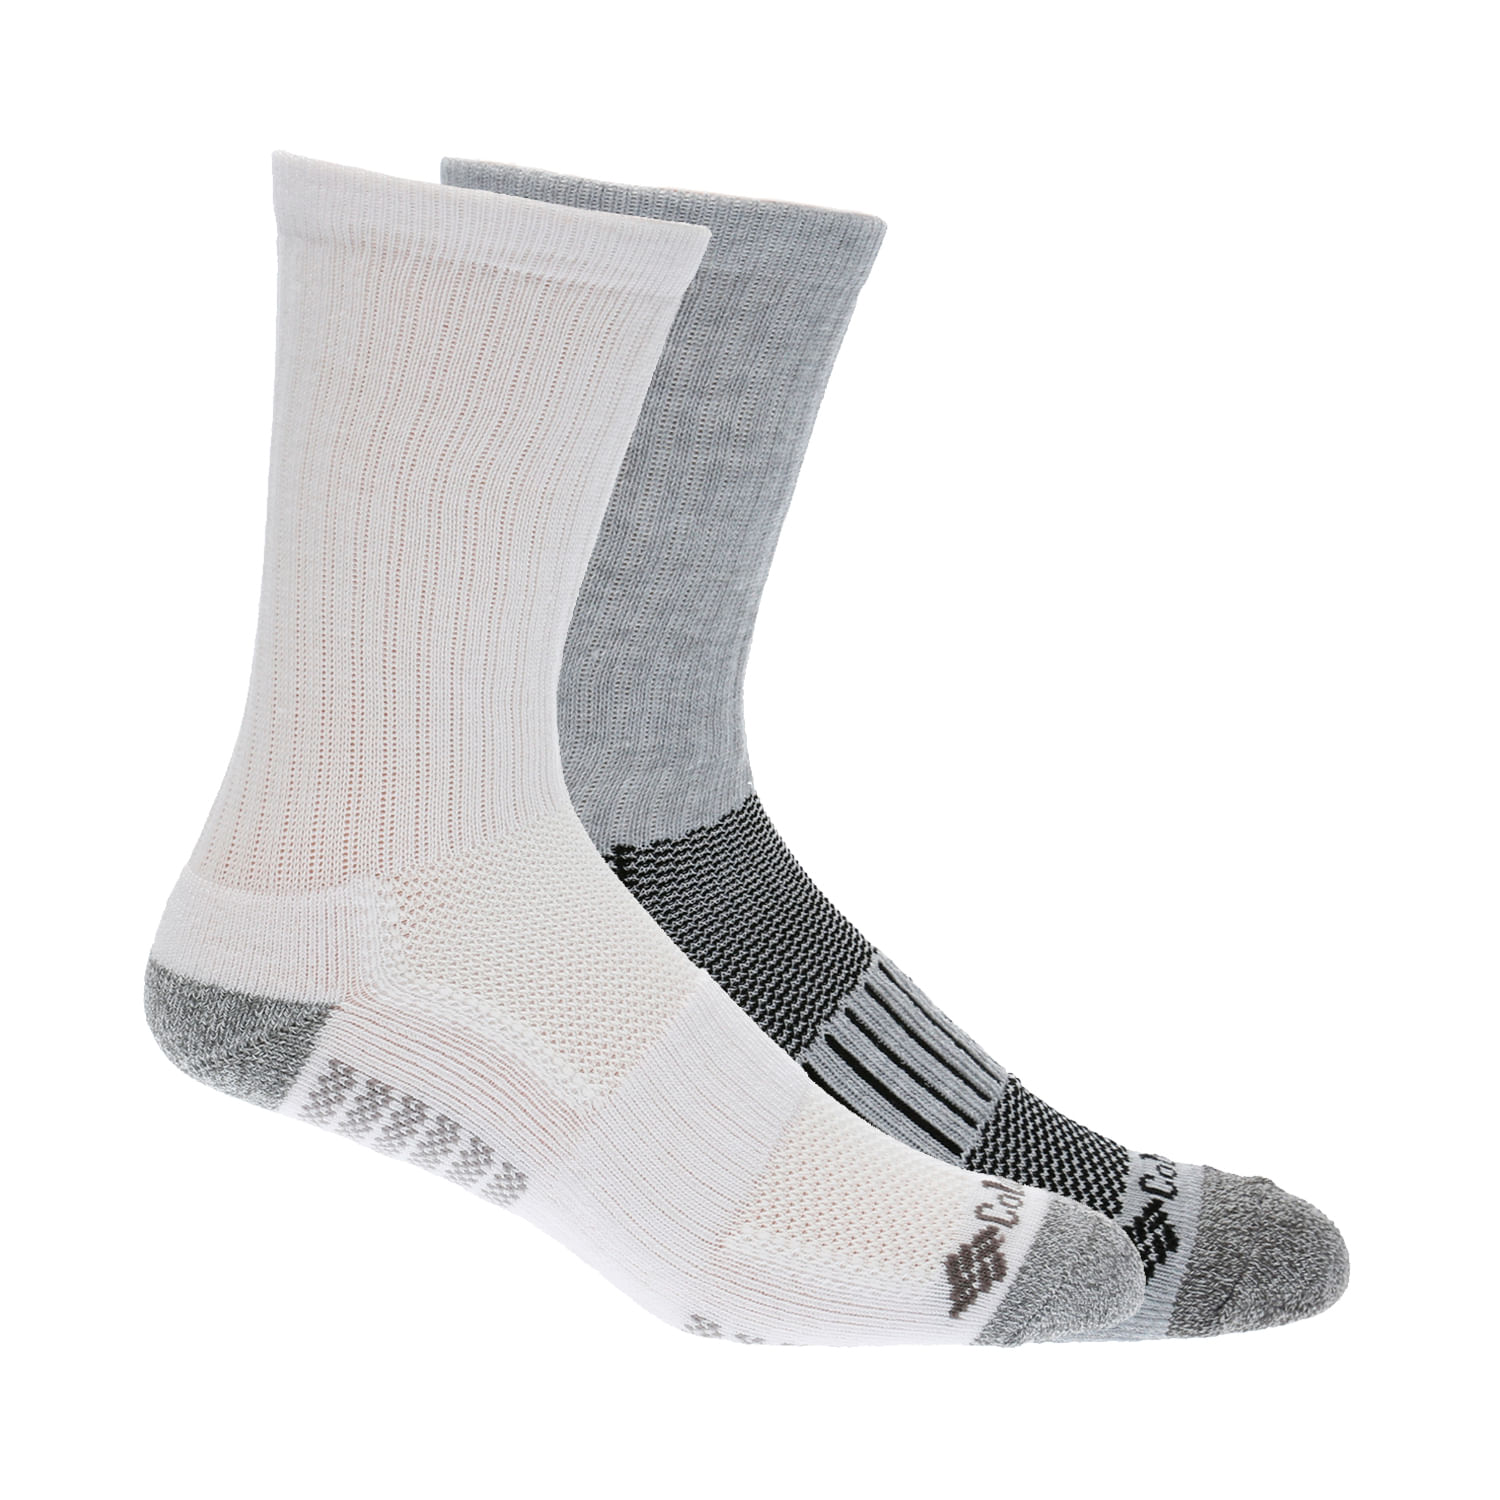 Ripley - PACK 2 CALCETINES HOMBRE 2PK STRP CREW M BLANCO